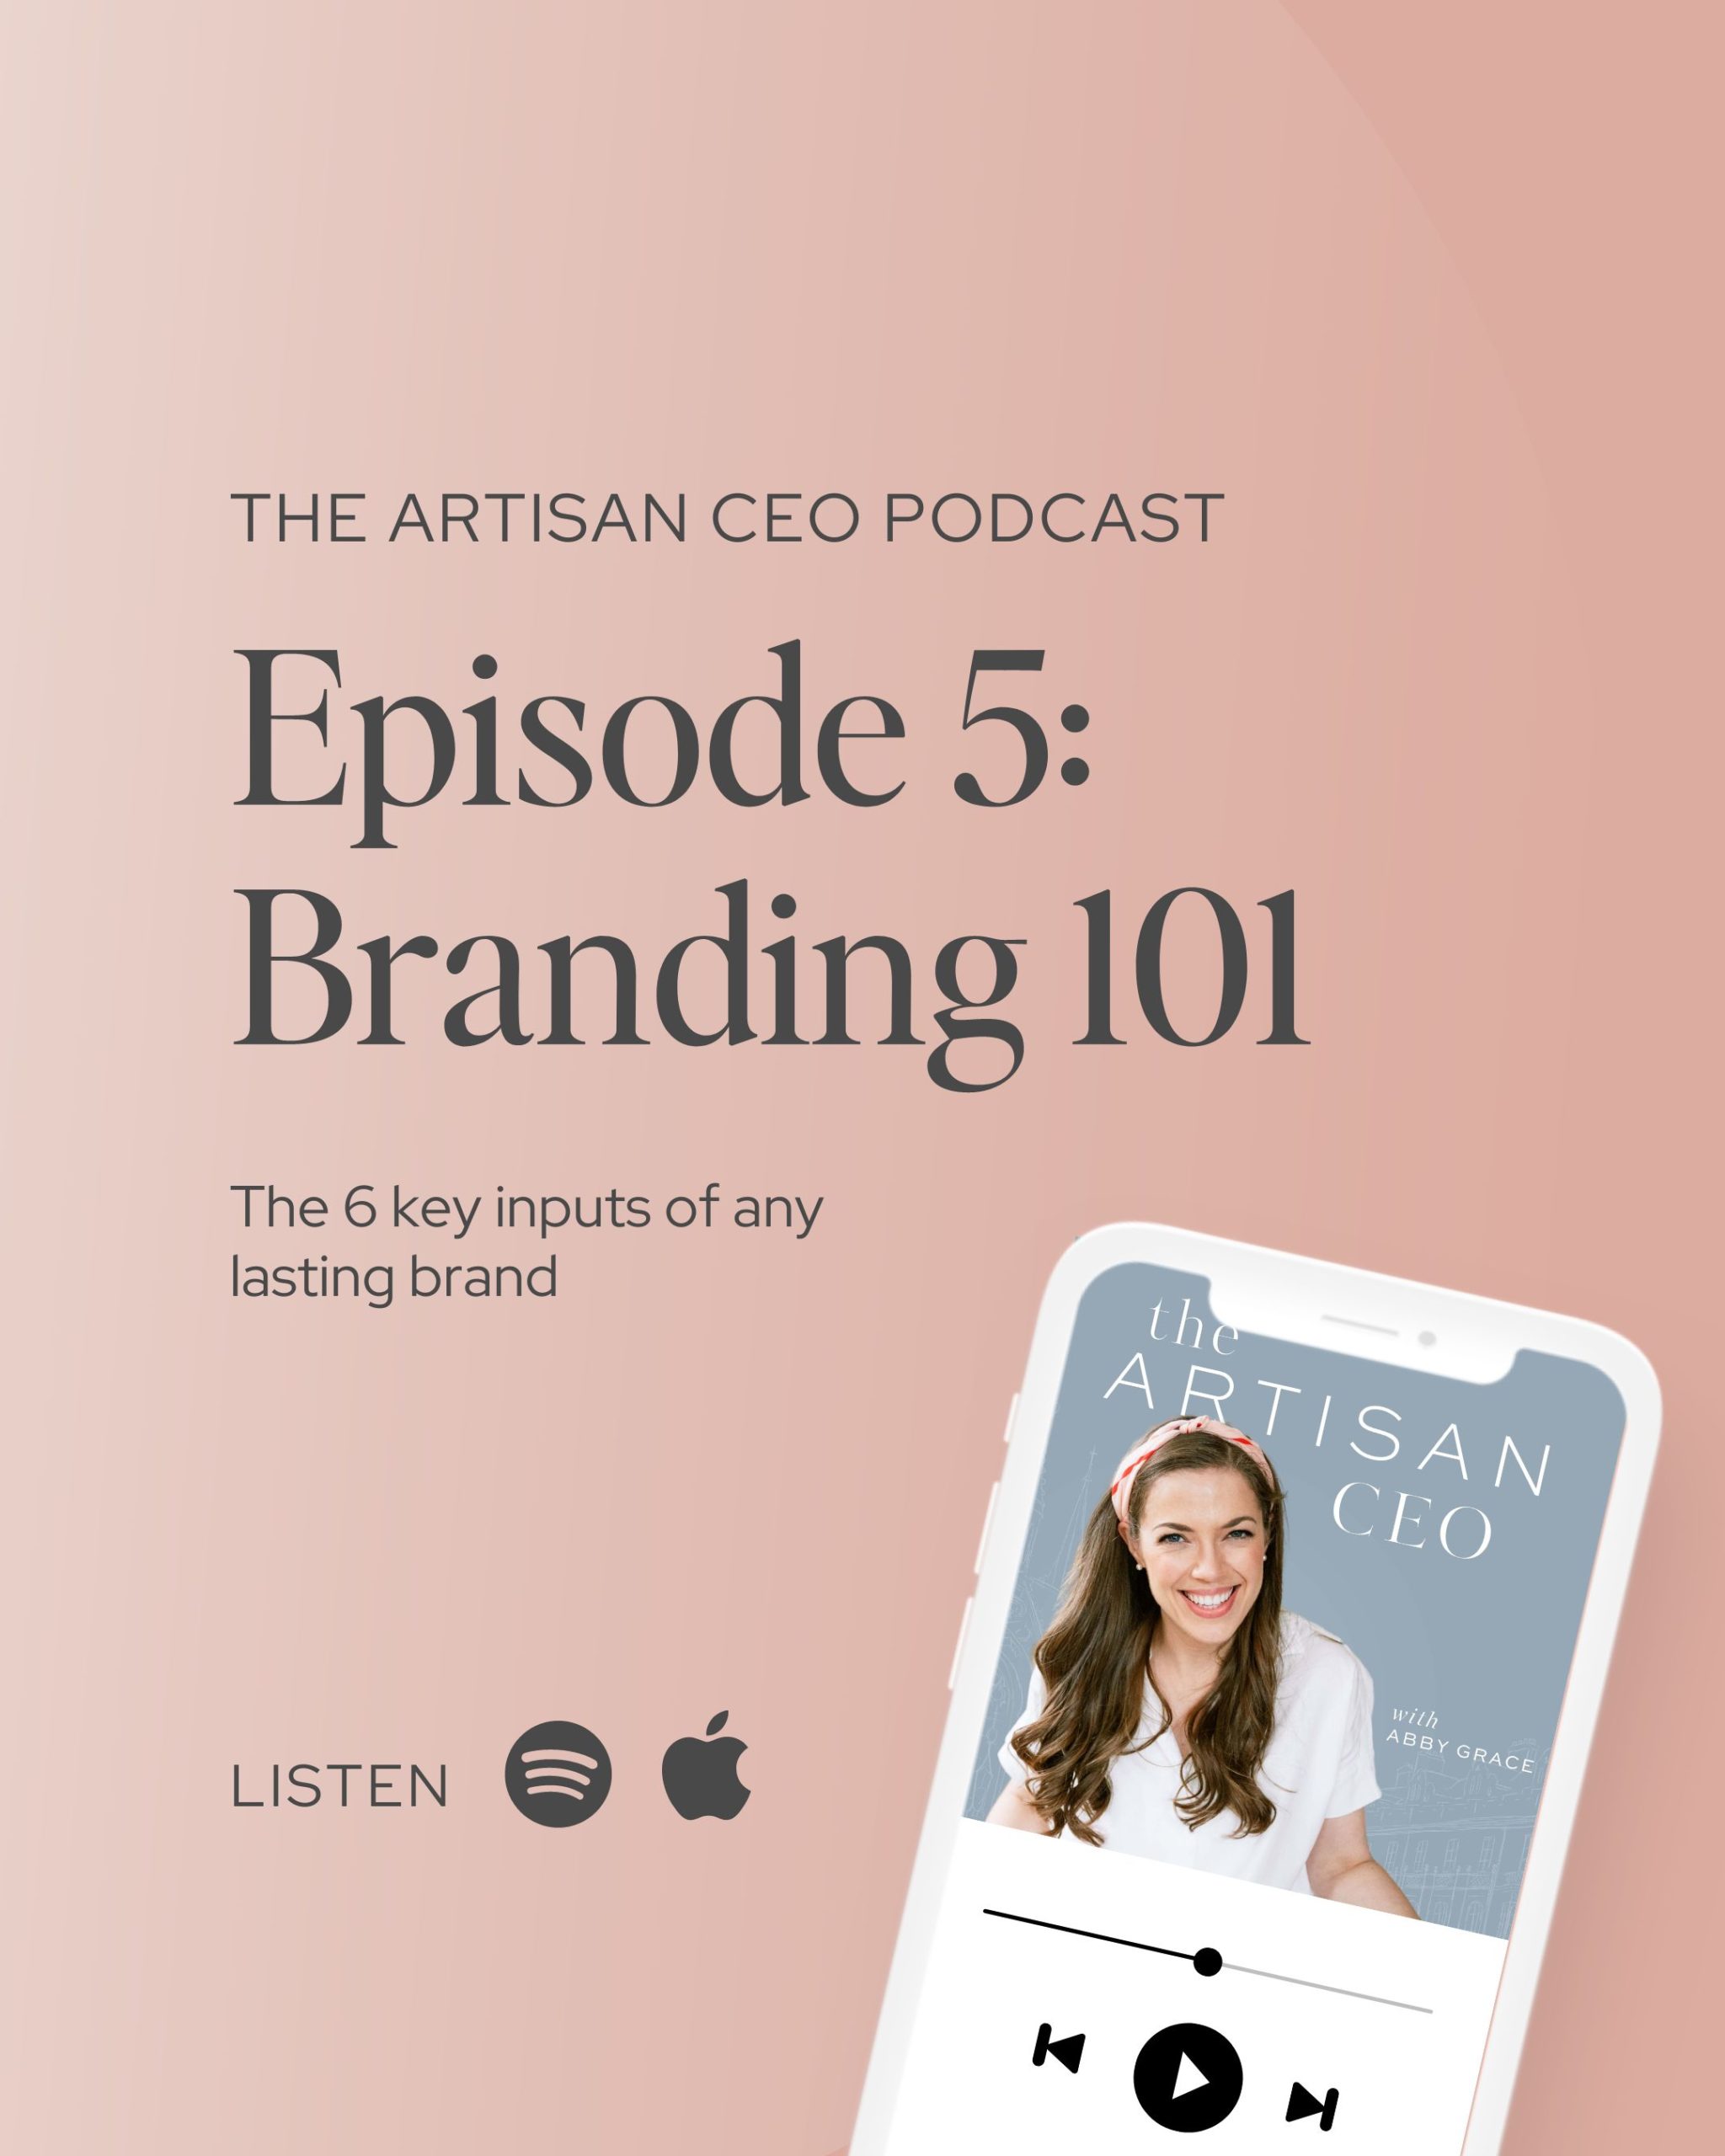 Branding 101 | Episode 5 of The Artisan CEO podcast with Abby Grace